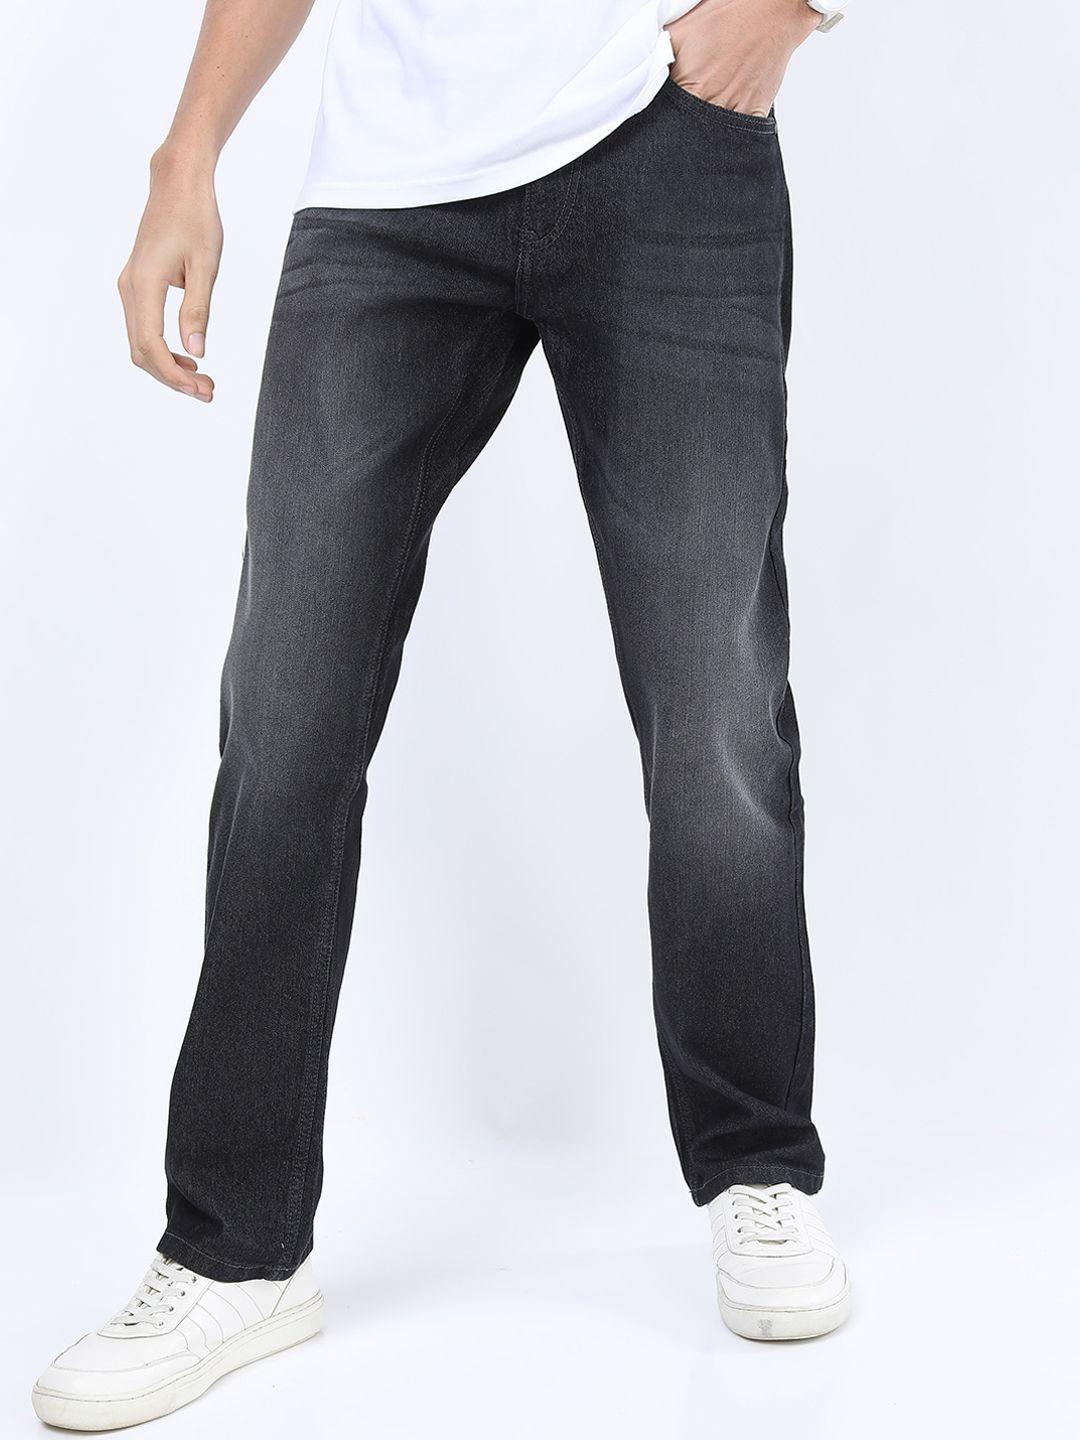 ketch-men-charcoal-straight-fit-mid-rise-light-fade-stretchable-jeans